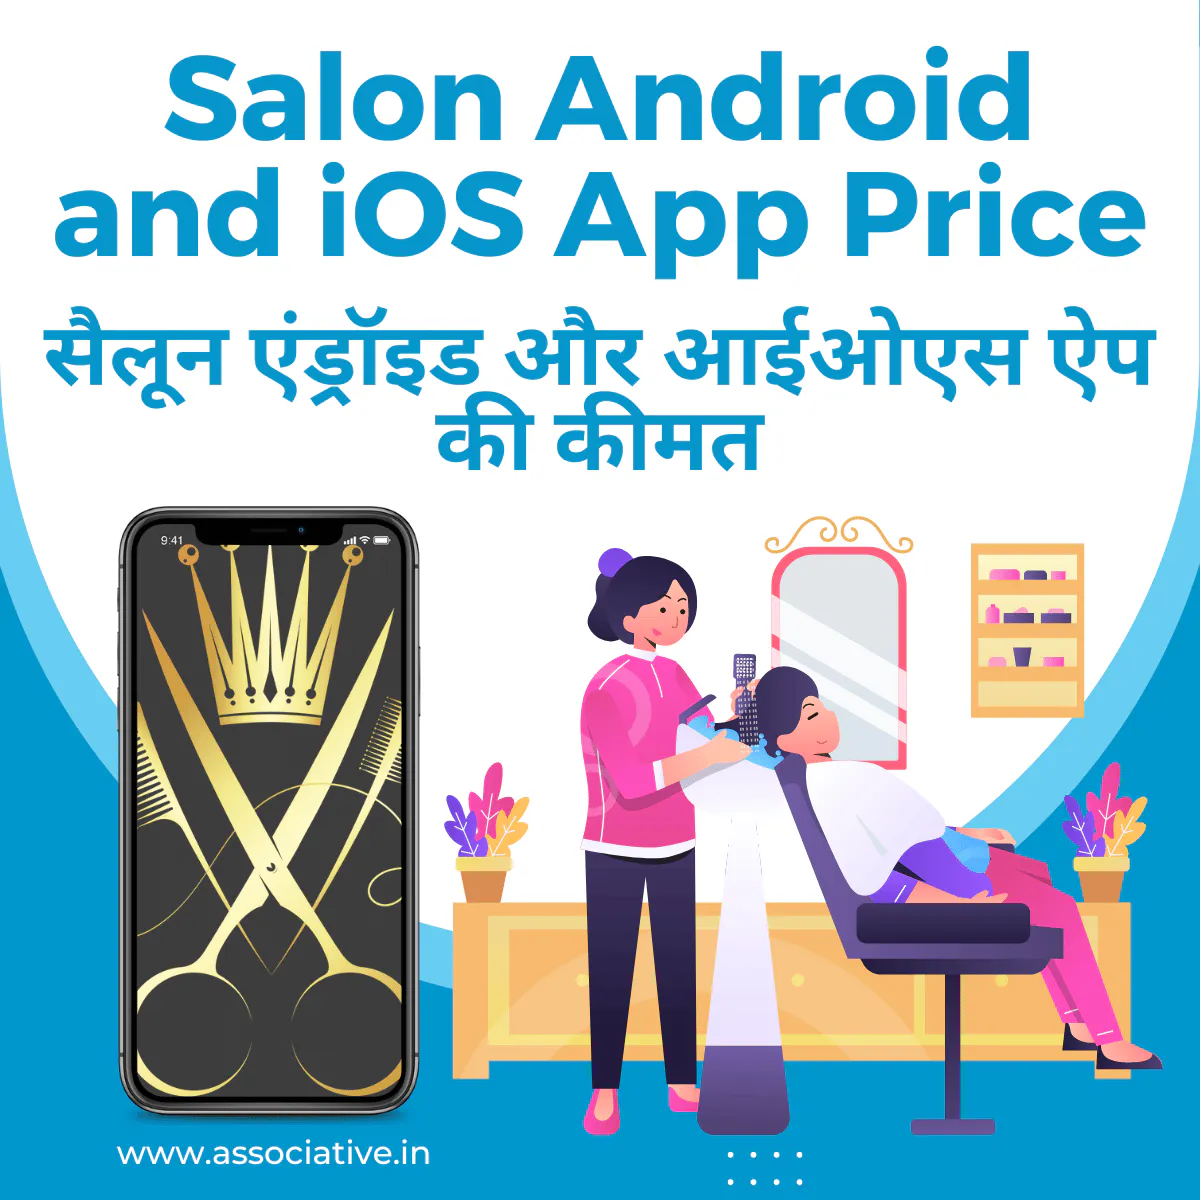 Salon Android and iOS App